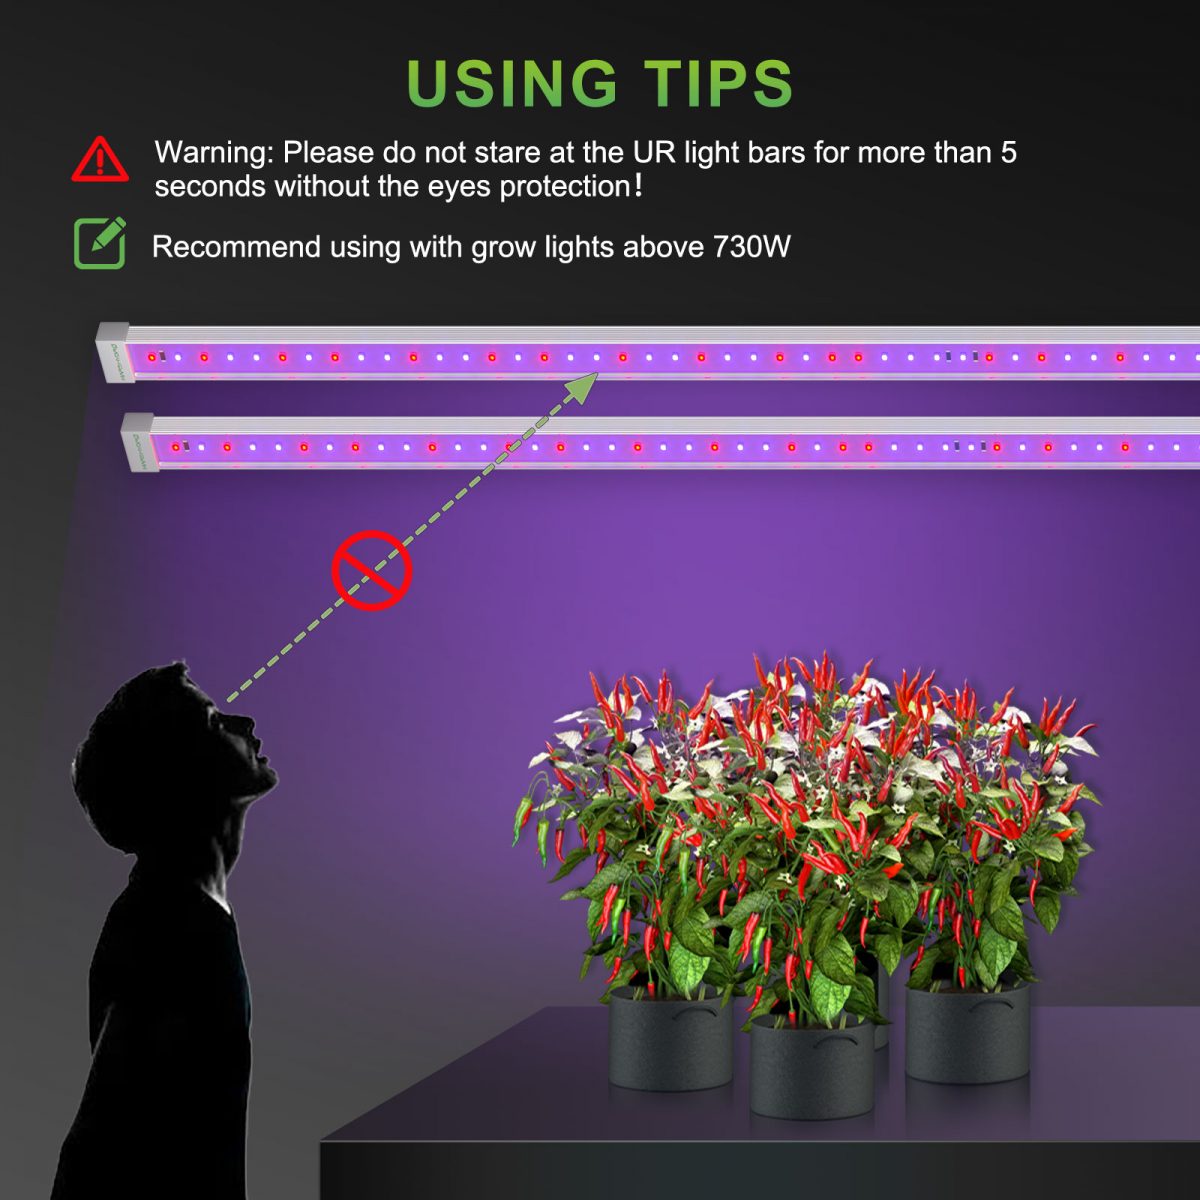 IR Grow Light - Infrared To Regulate Plant Growth: IR (730-745nm) on UR45 supplemental light bars can work with far-red light to produce a shade-avoidance response in plants, thereby accelerating stem growth. The introduction of appropriate IR can induce plants to enter the flowering stage or to enter the sleeping stage more quickly.